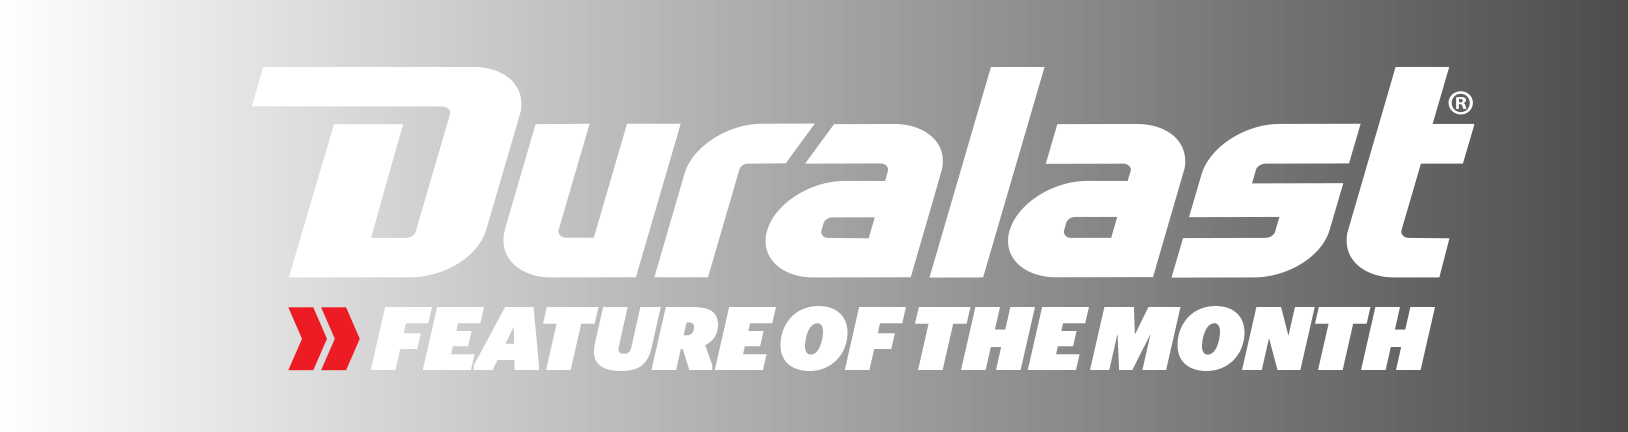 Duralast Feature of the Month logo